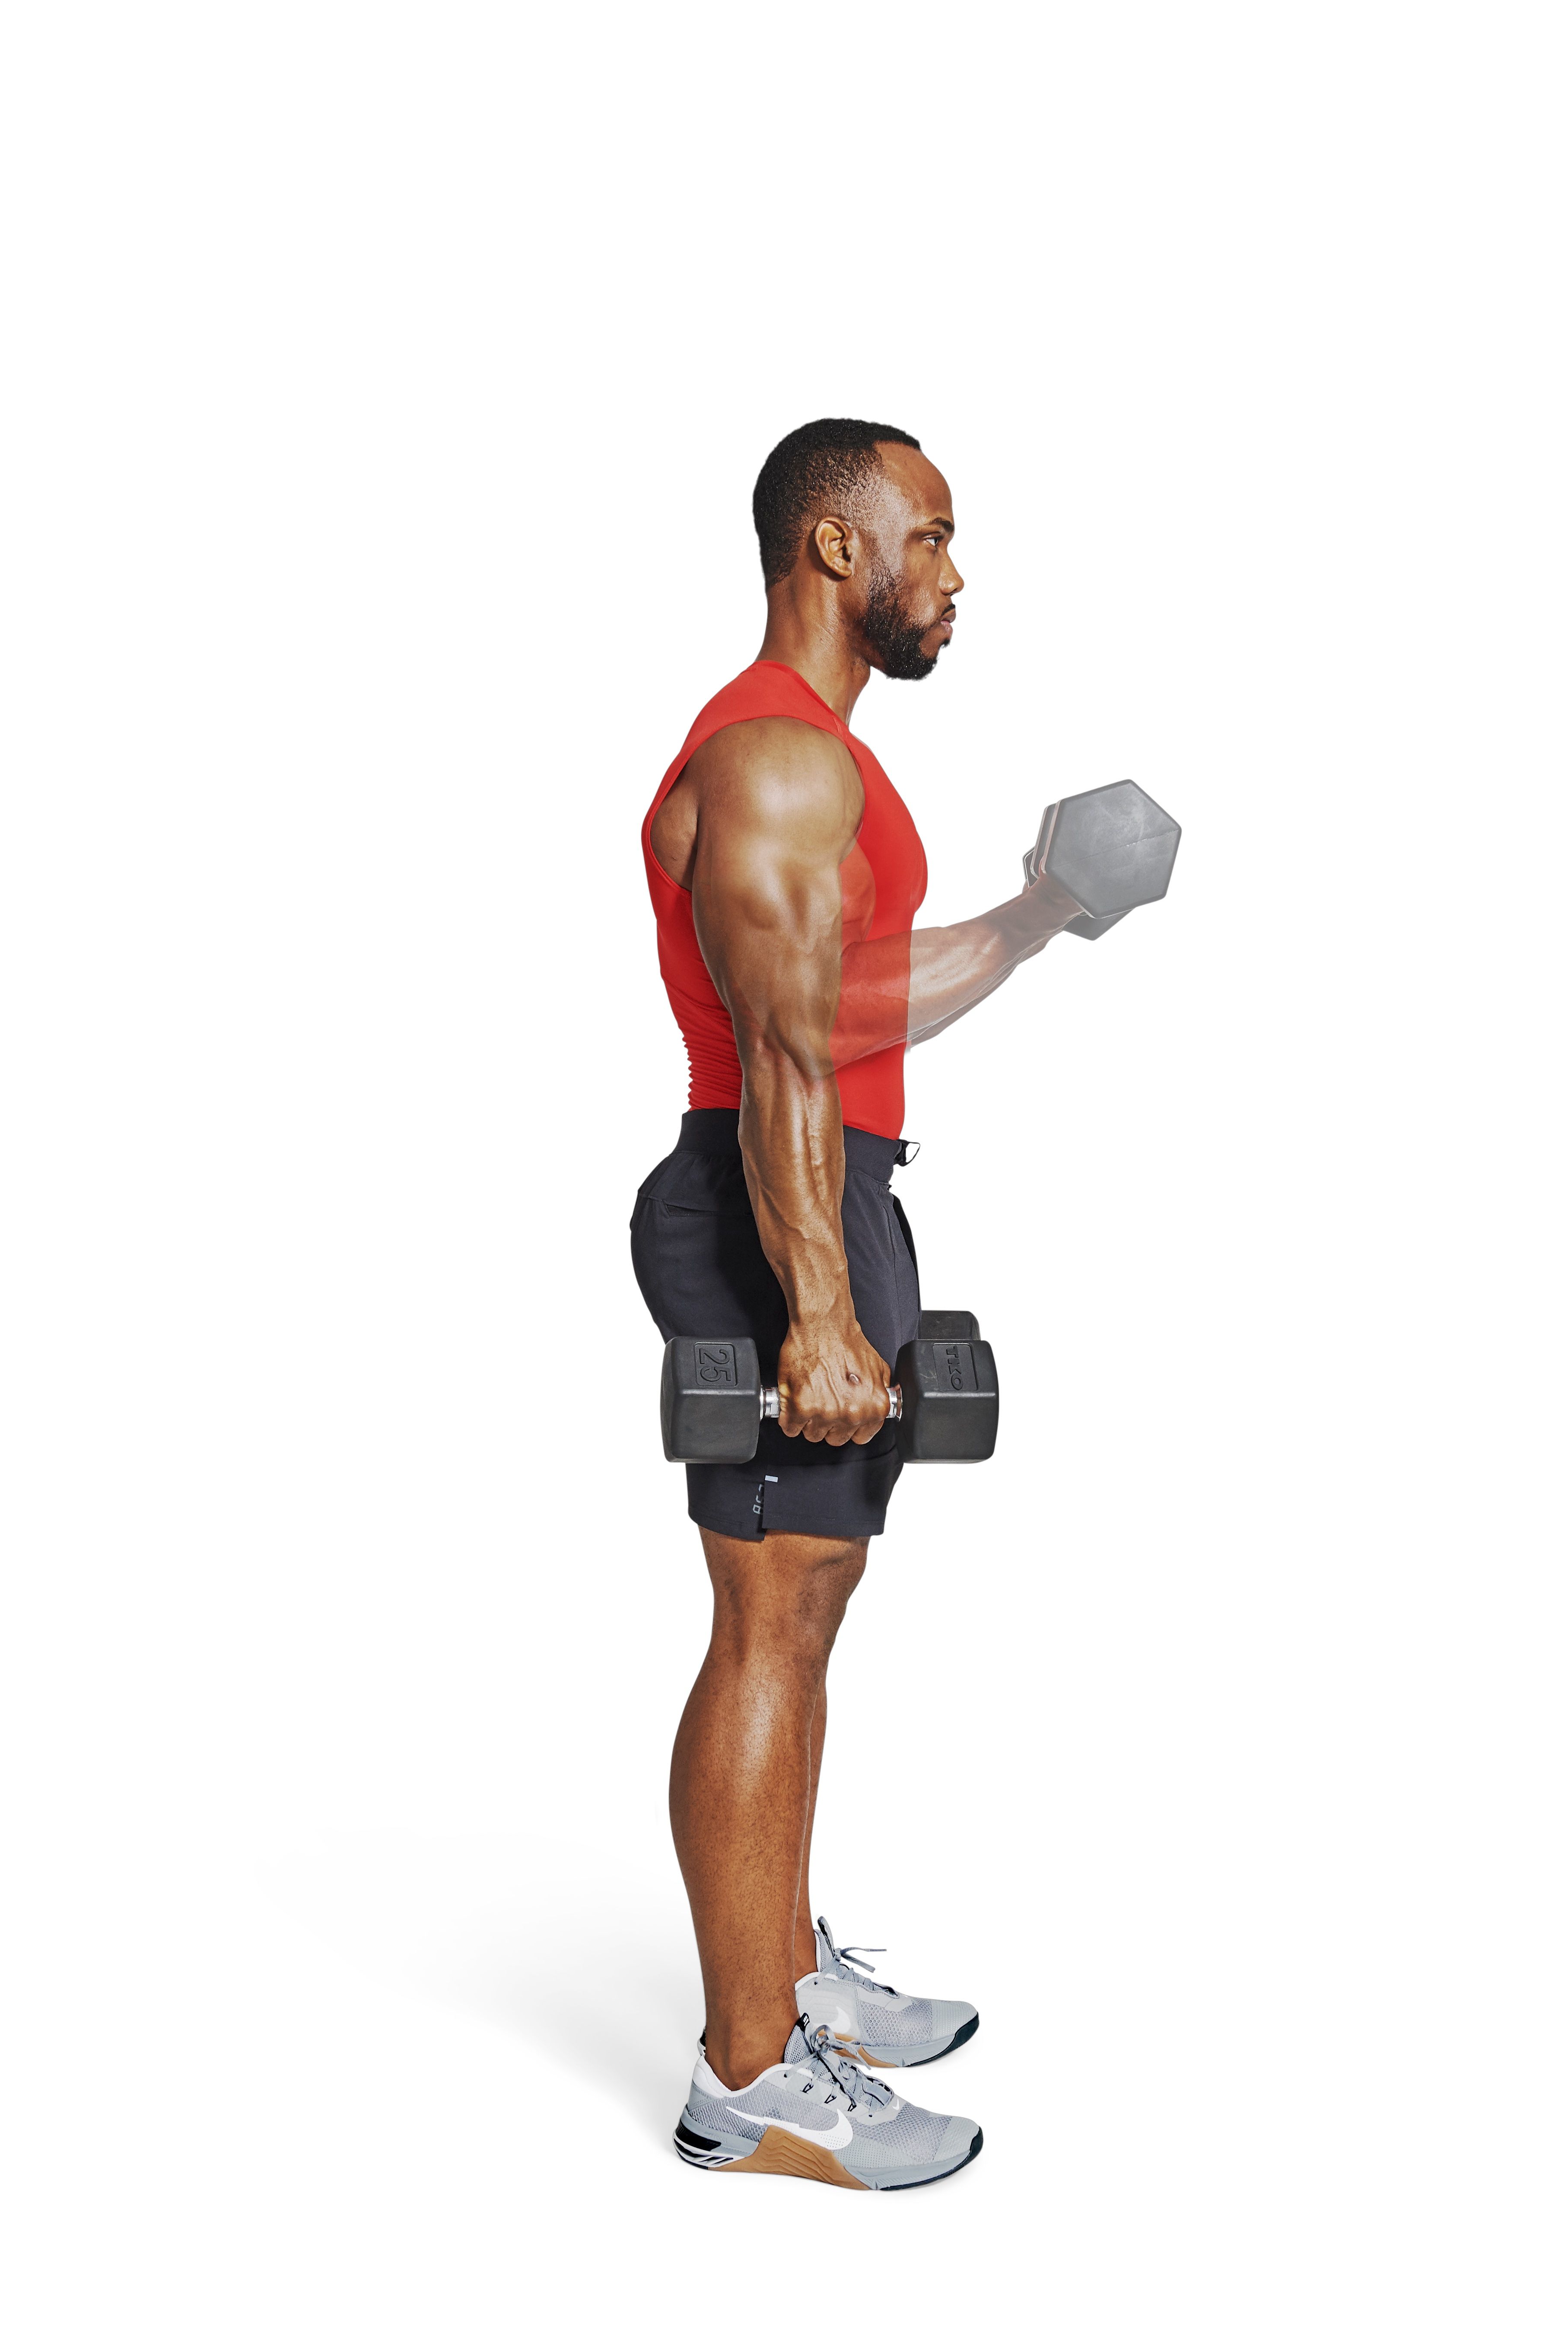 Try This Total Body Dumbbell Workout for New Year's Fitness 2023